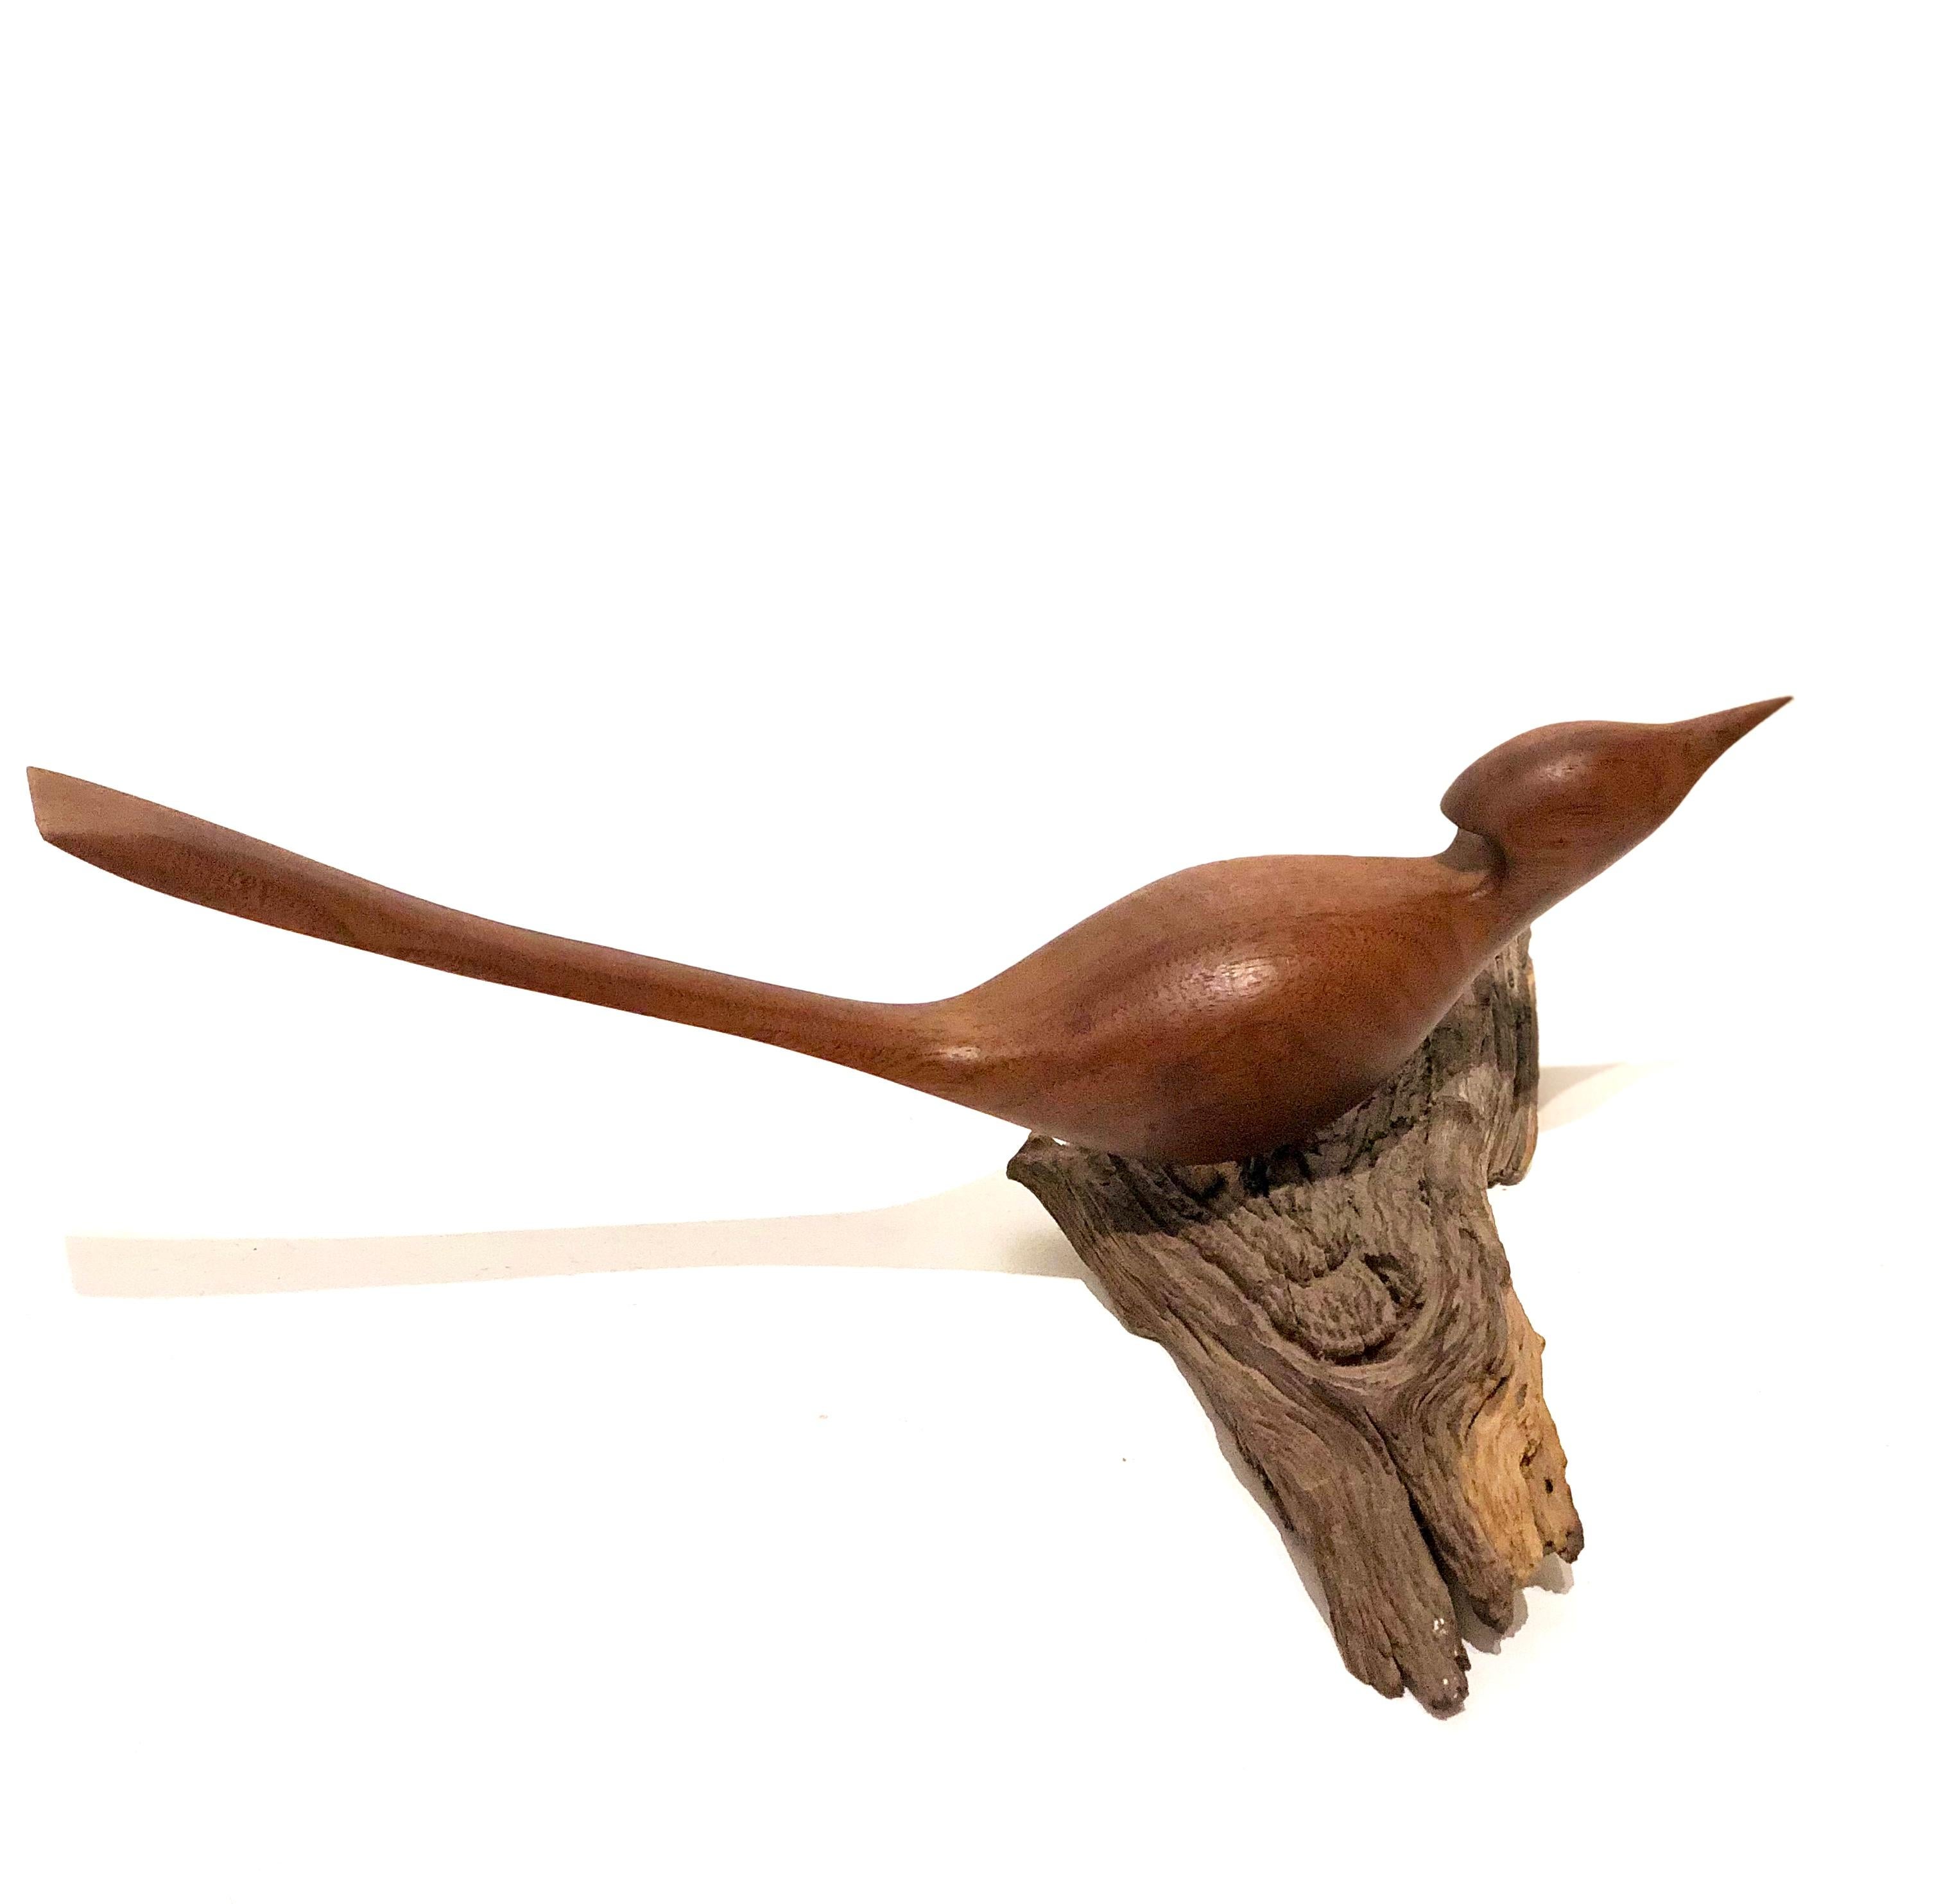 Vintage hand carved walnut bird sculpture on drift wood base, circa 1960s. Well done piece in great condition .